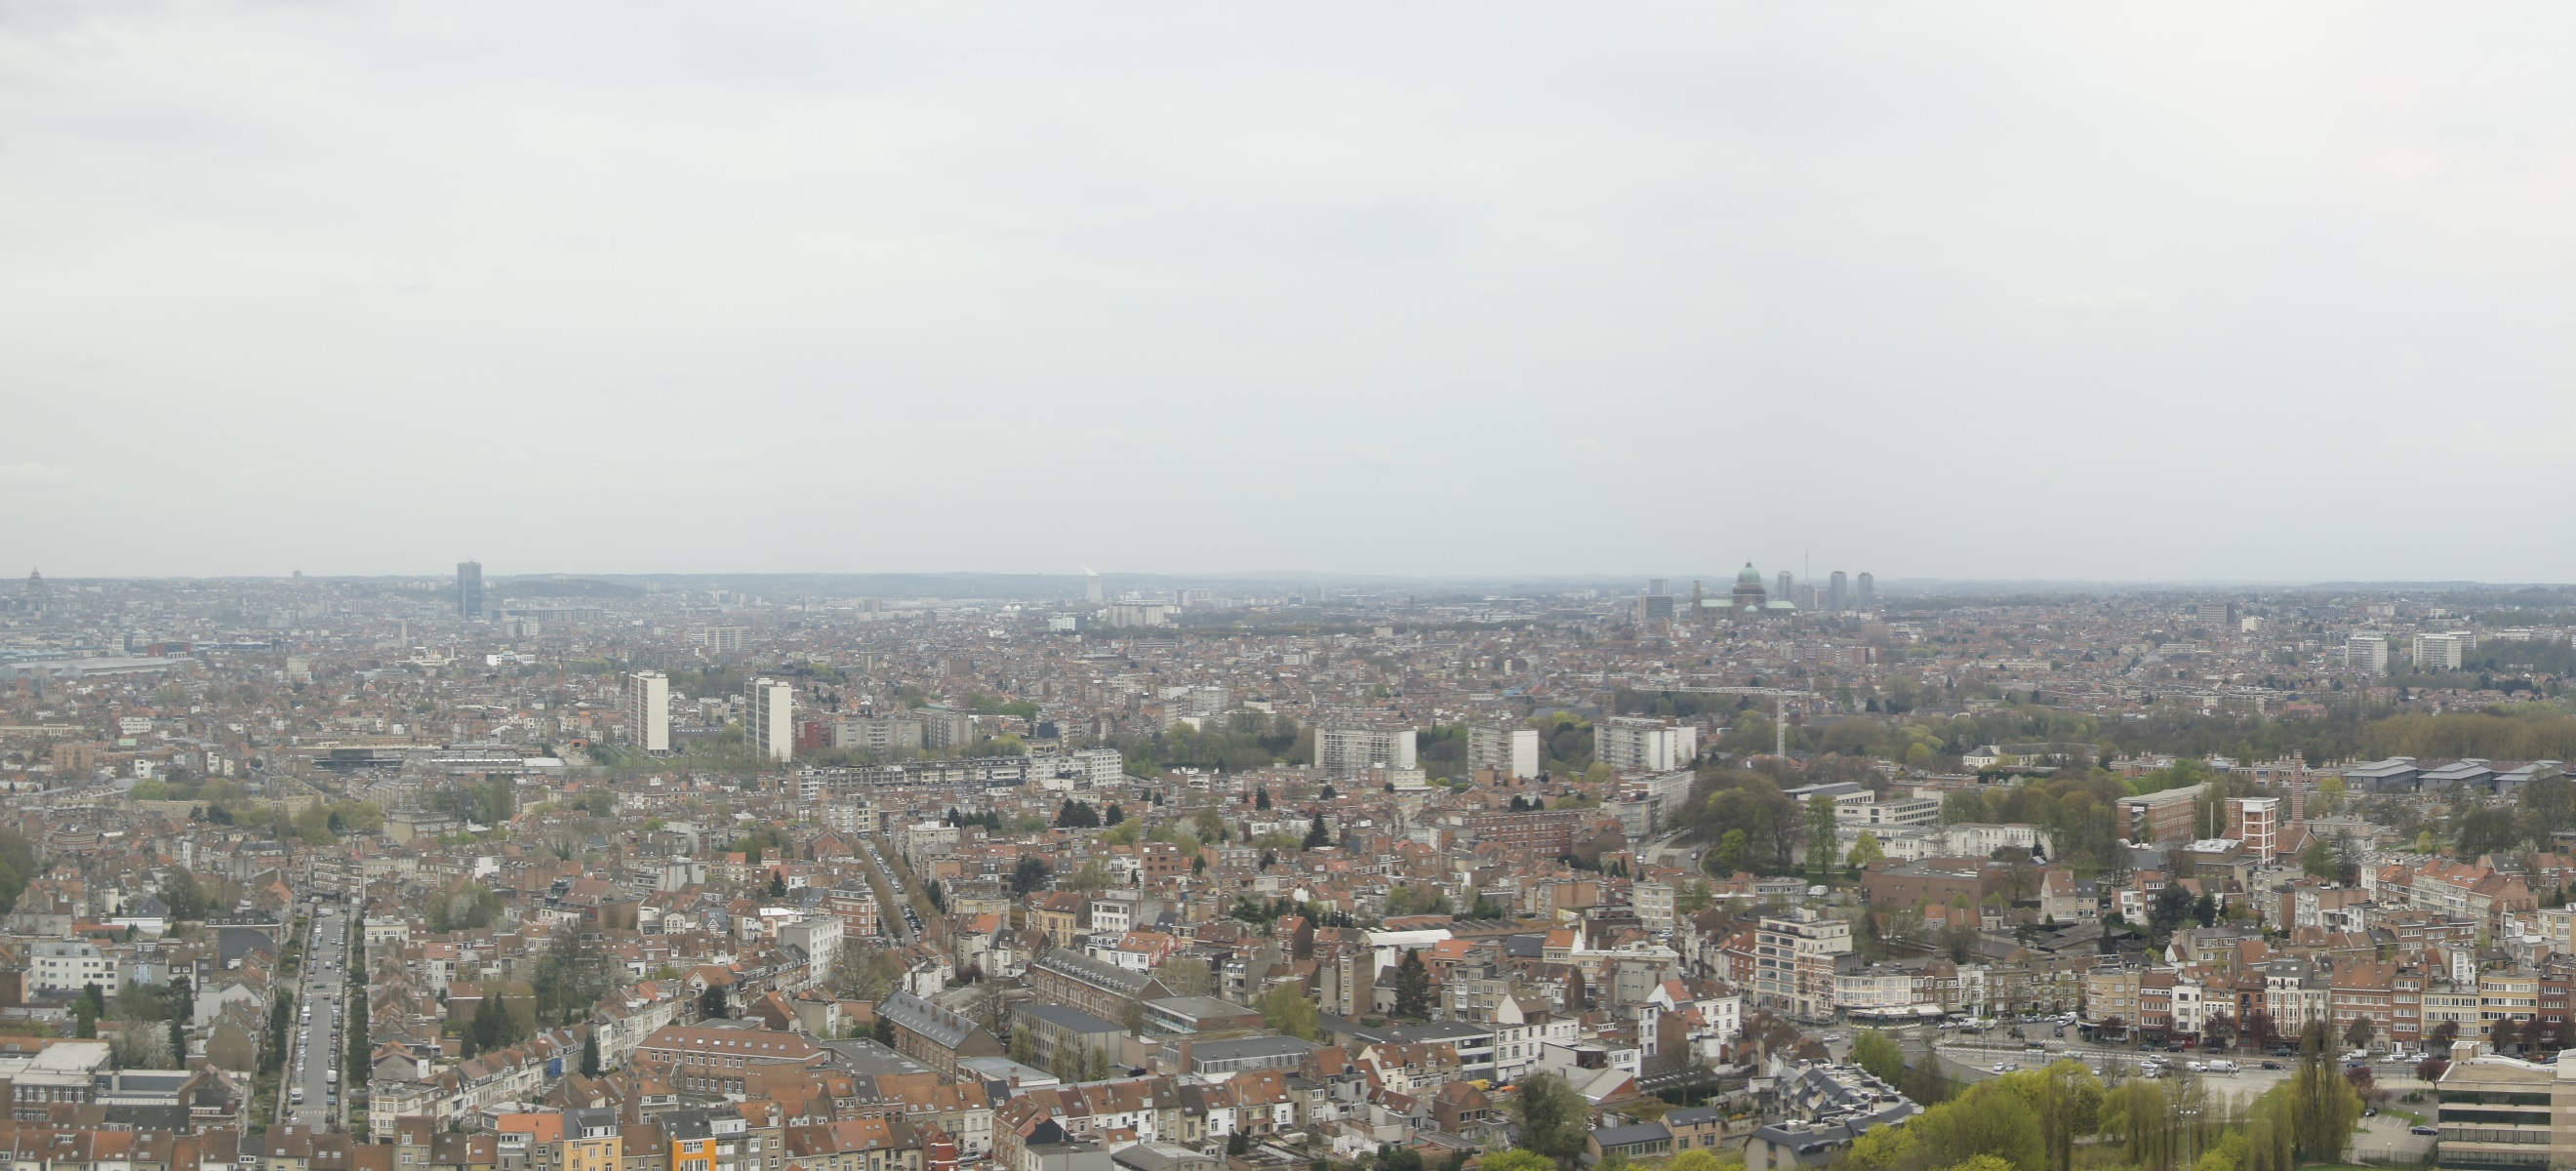 http://commons.wikimedia.org/wiki/File%3APanoramic_view_of_brussels.jpg